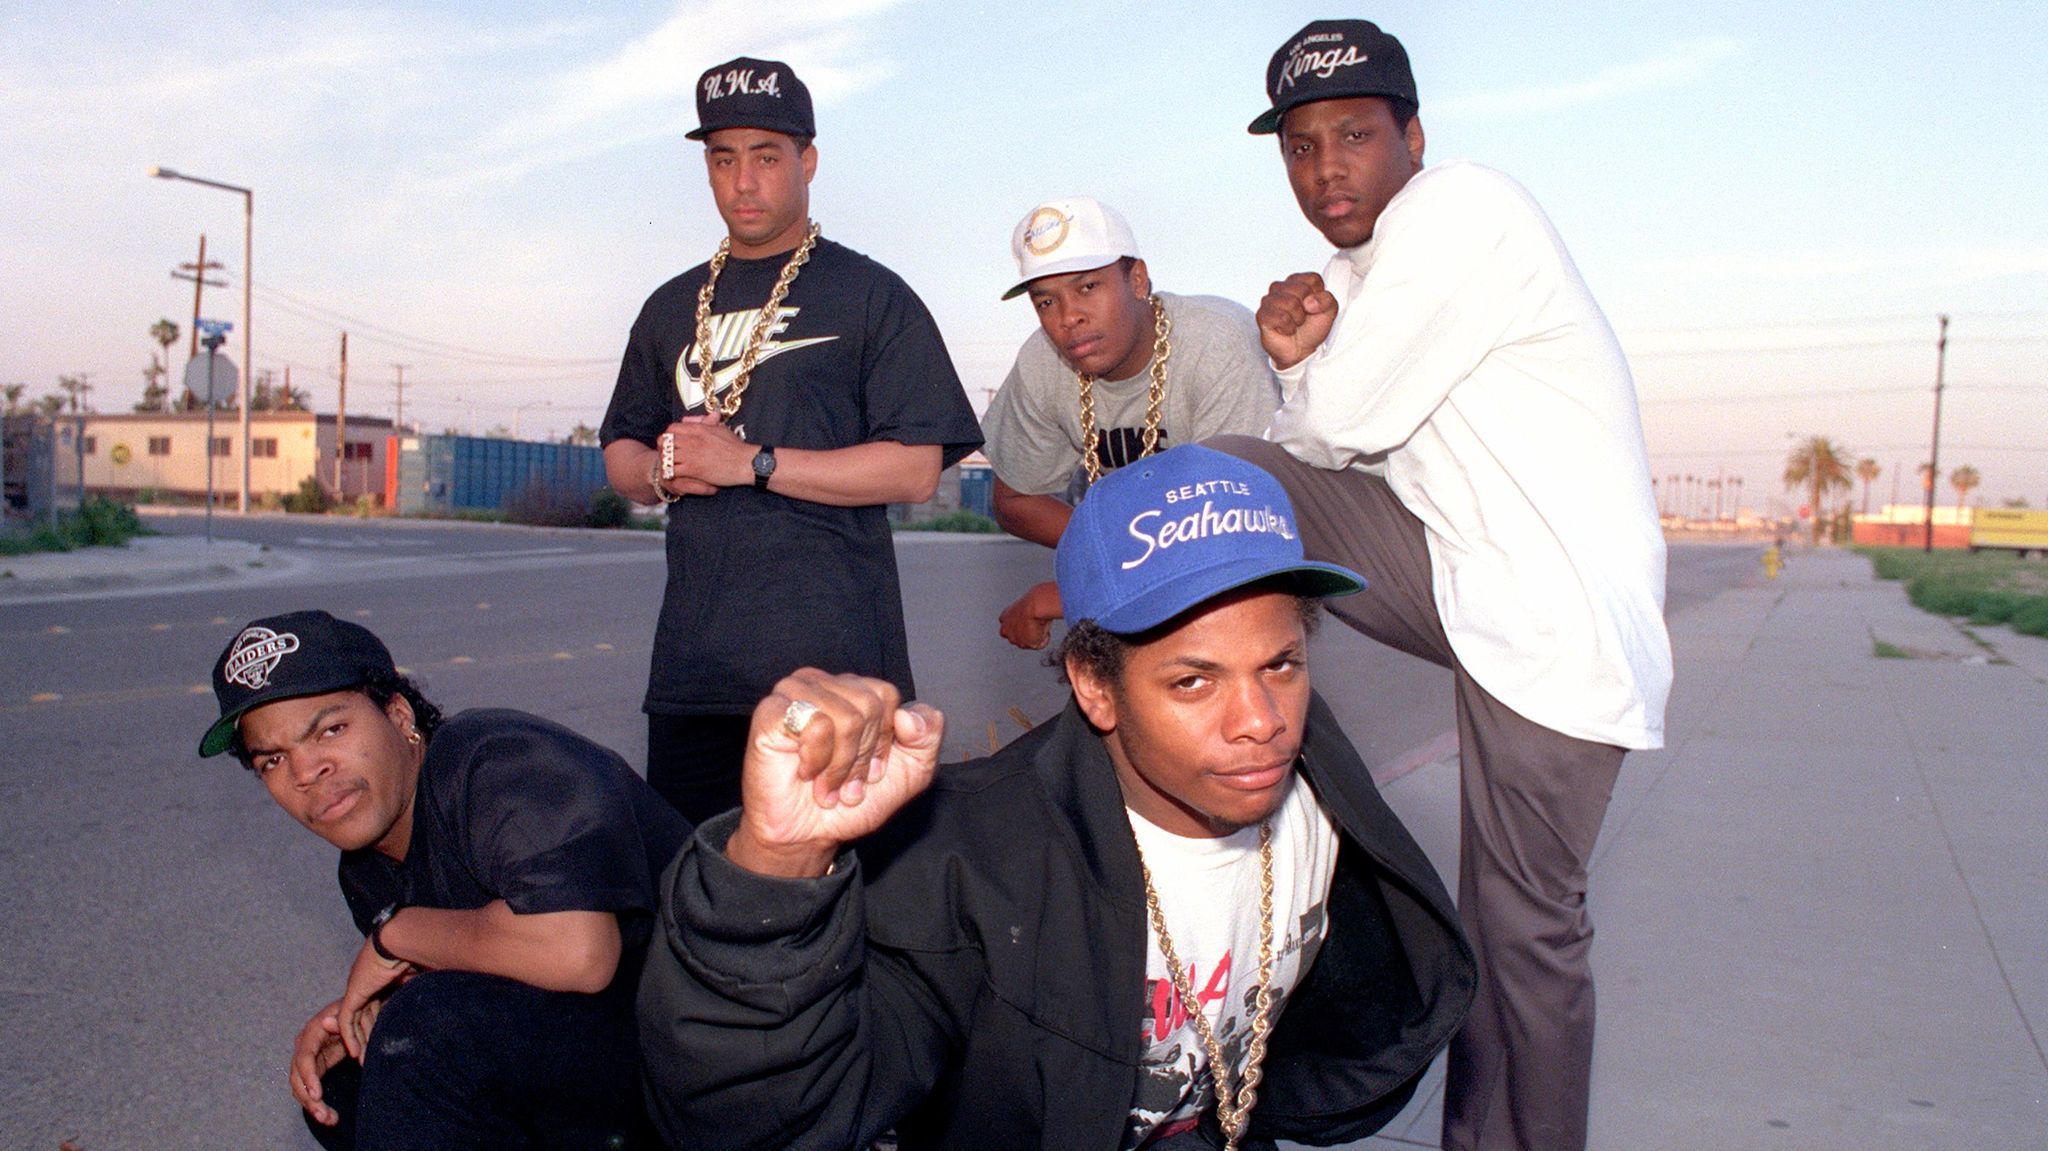 The moment N.W.A changed the music world. Gangsta rap, Straight